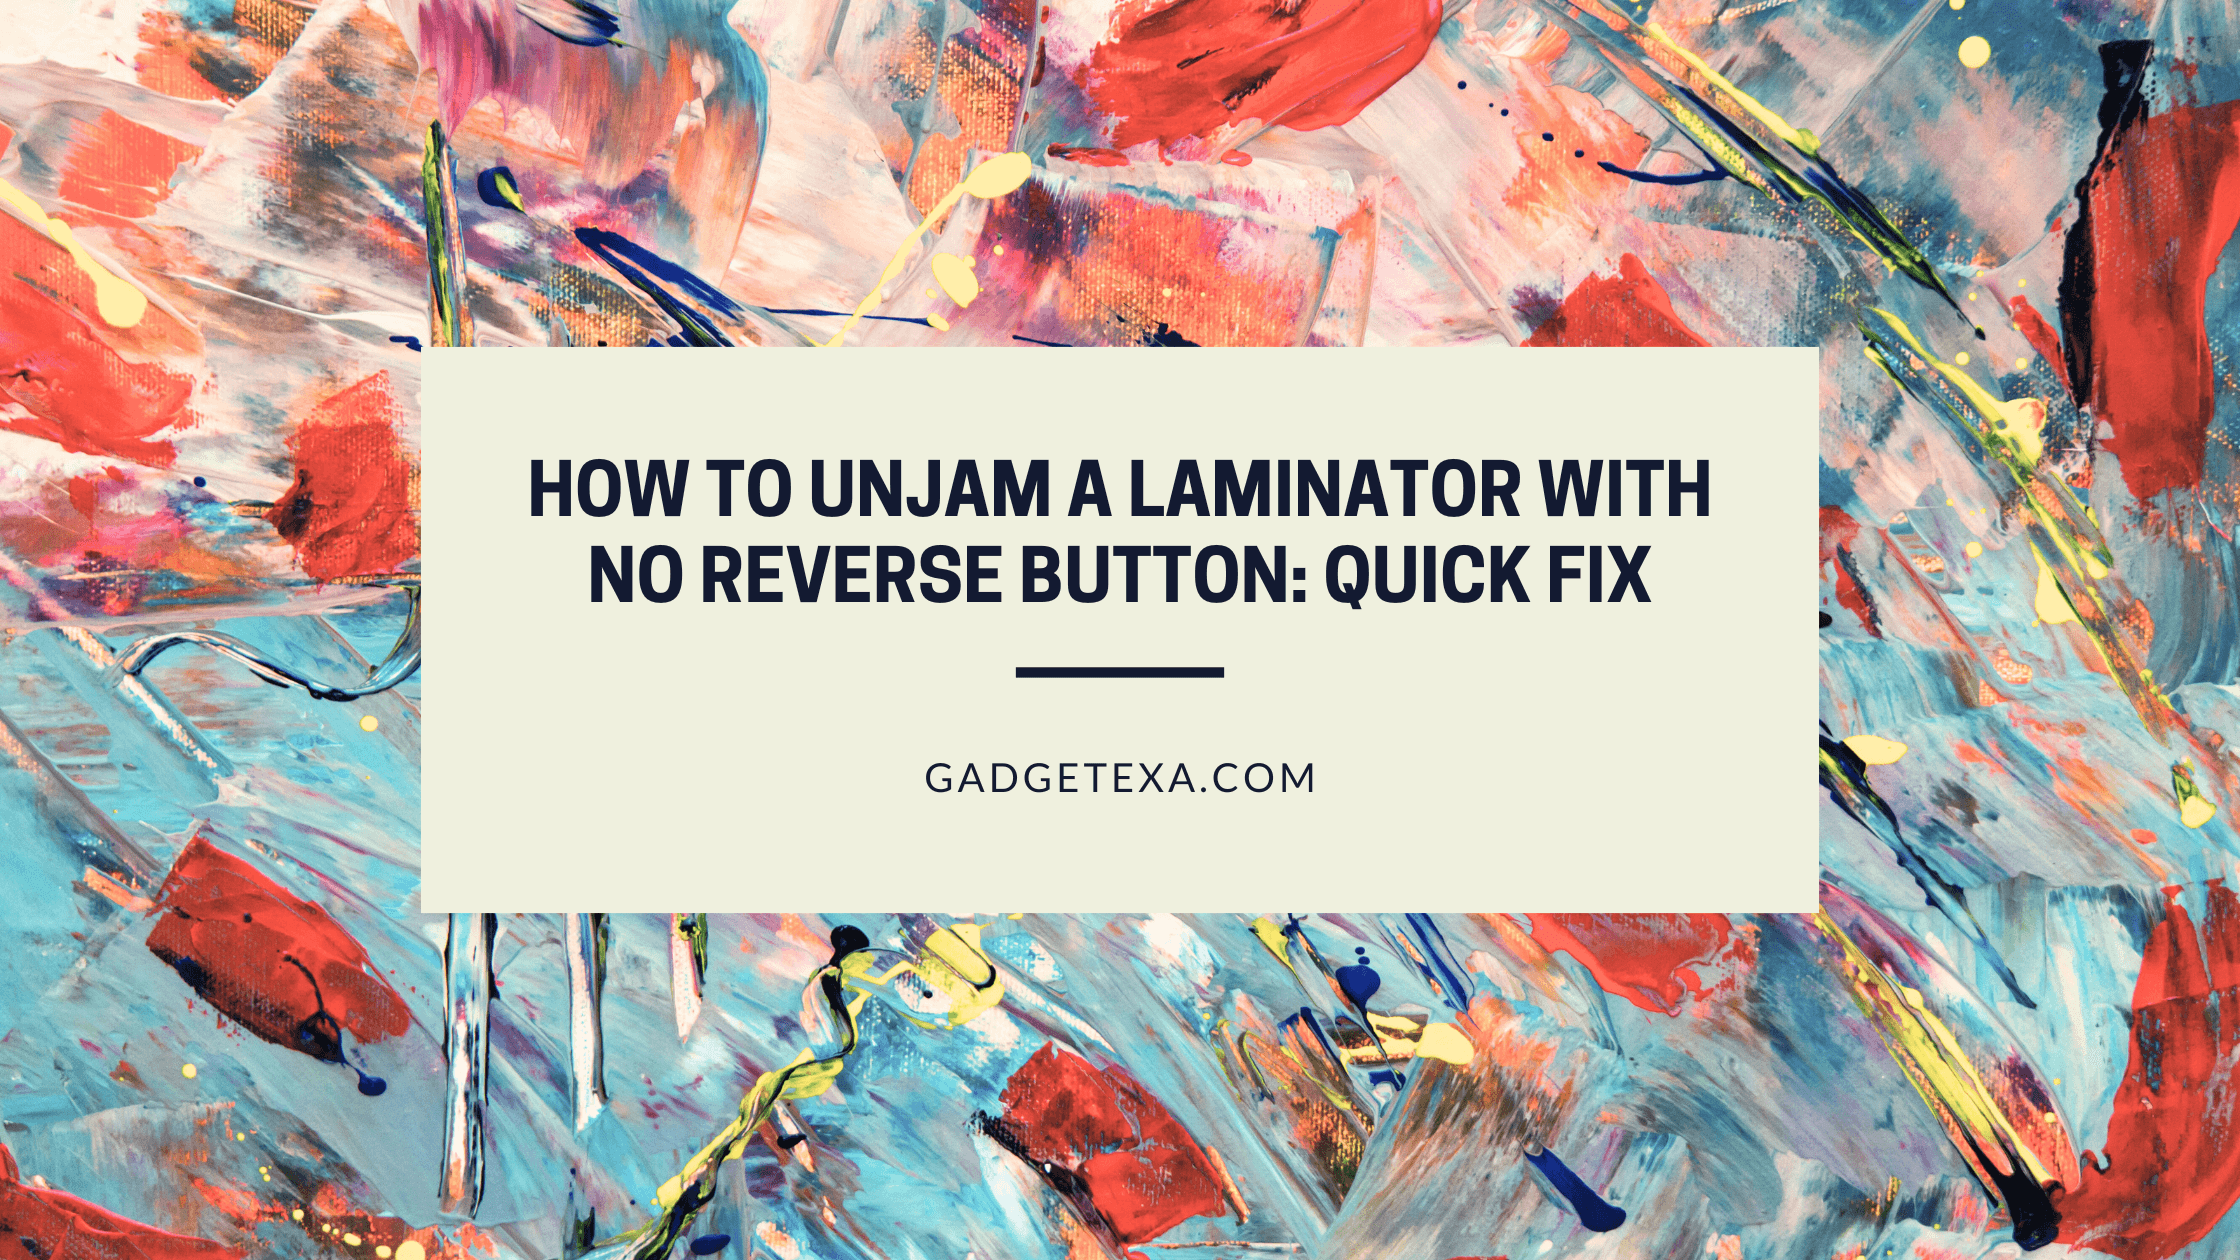 You are currently viewing How to unjam a laminator with no reverse button: Quick fix